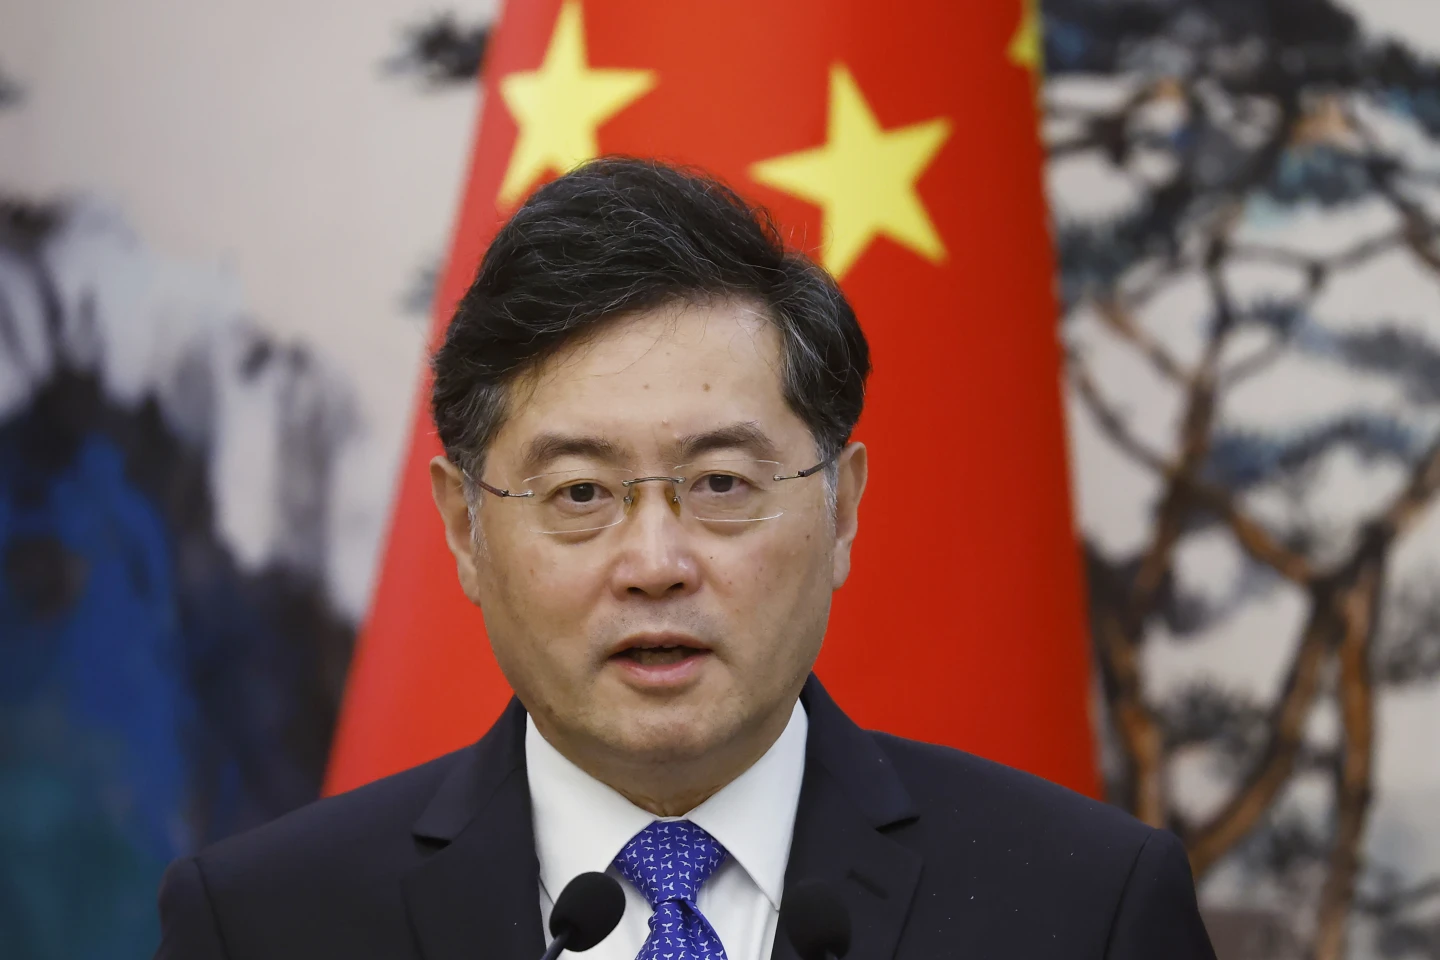 China removes its outspoken foreign minister, fueling rumors of rivalries within the Communist Party